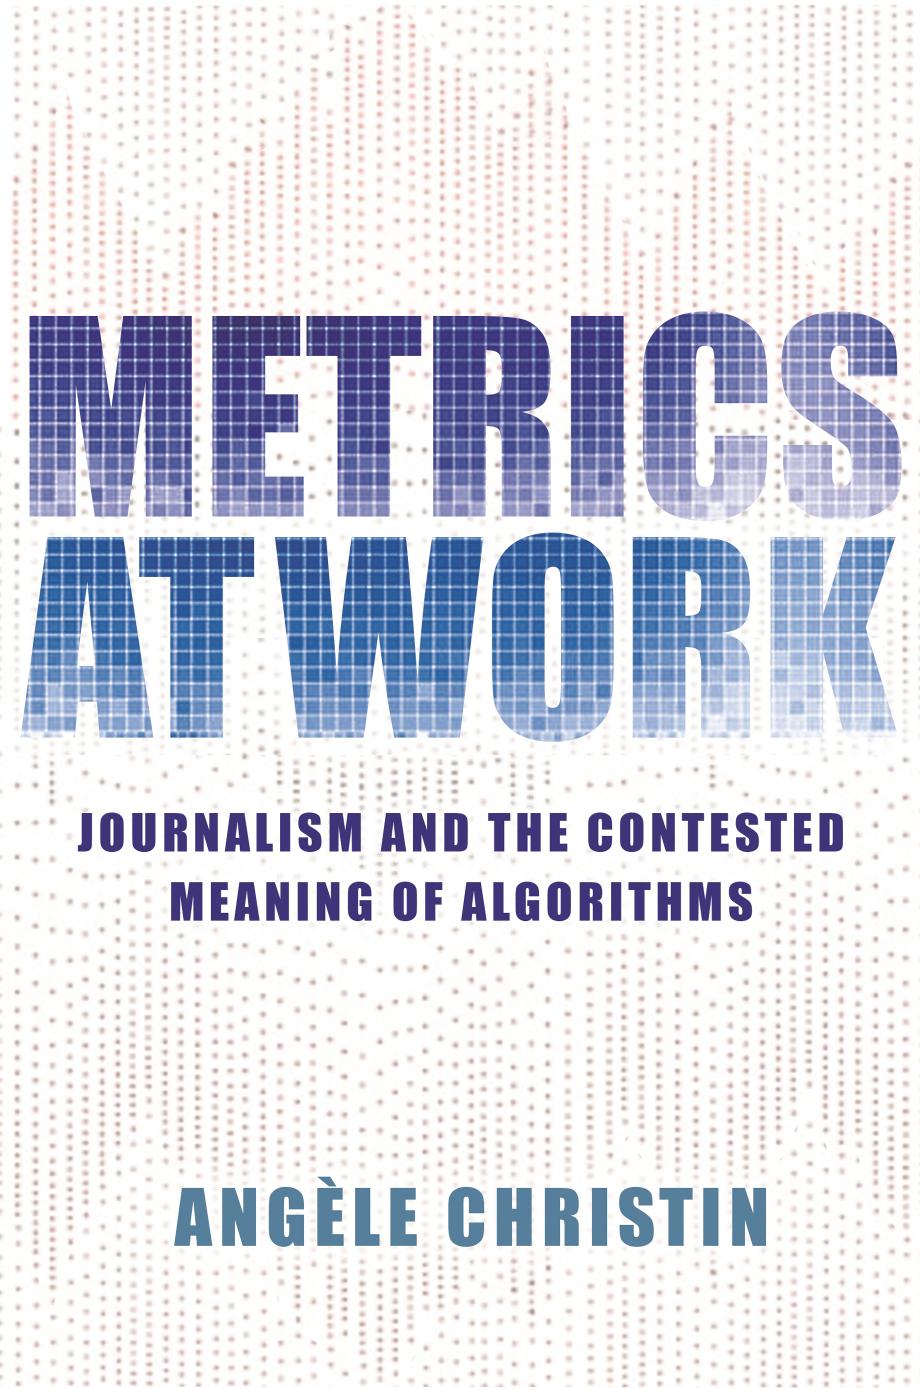 Metrics at Work: Journalism and the Contested Meaning of Algorithms by Angèle Christin